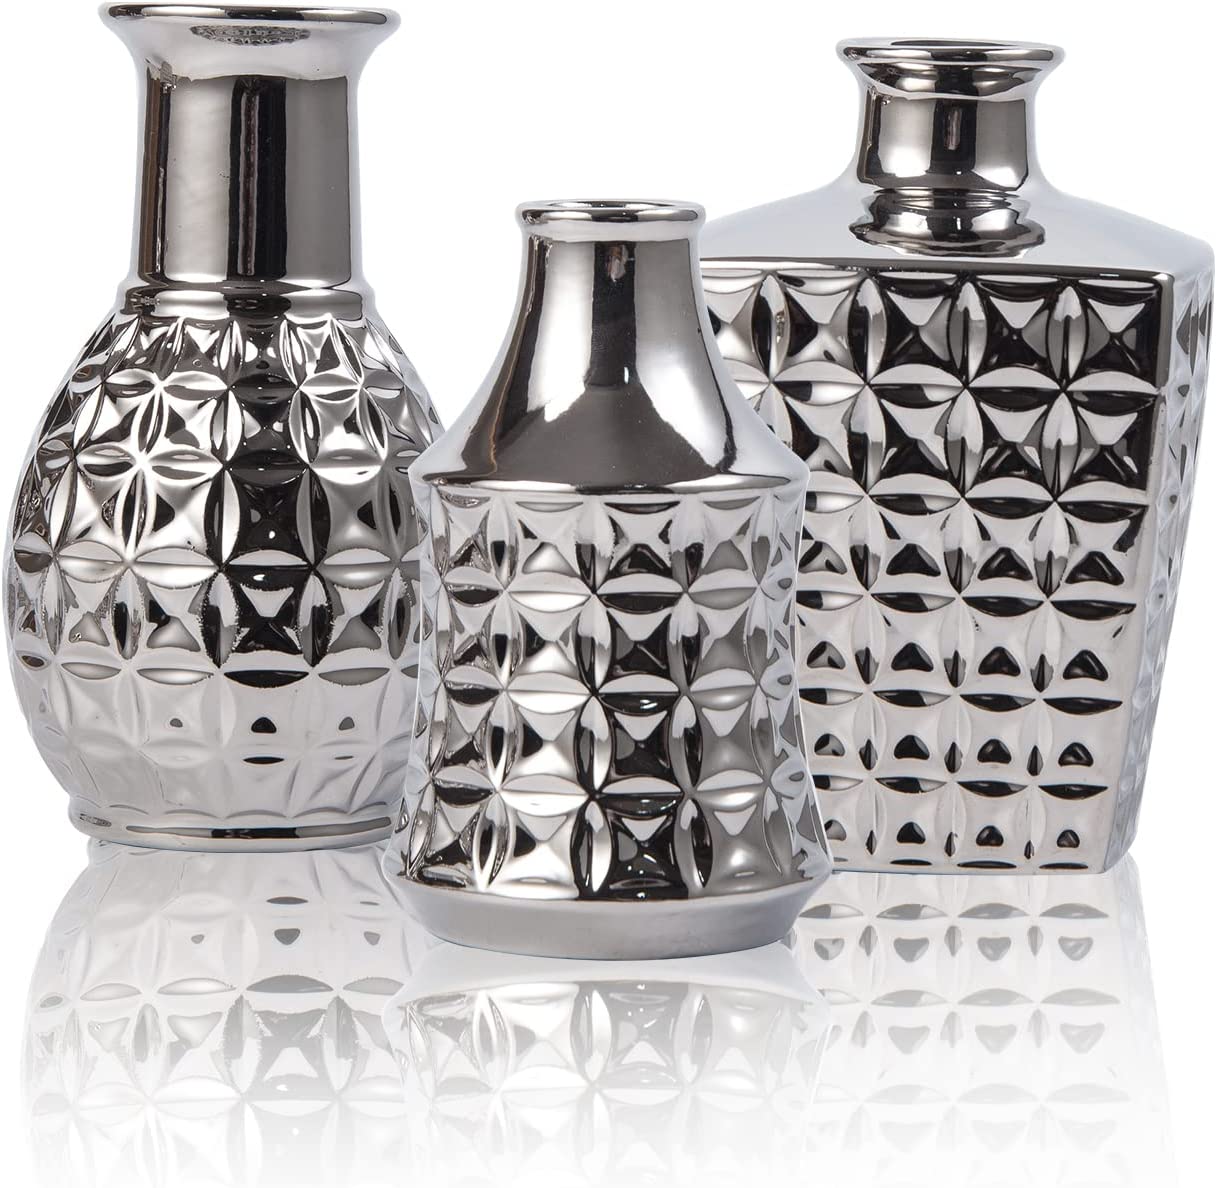 Exquisite Vintage Silver Luxury Embossed Ceramic Vase Set - Home Decor Gifts and More